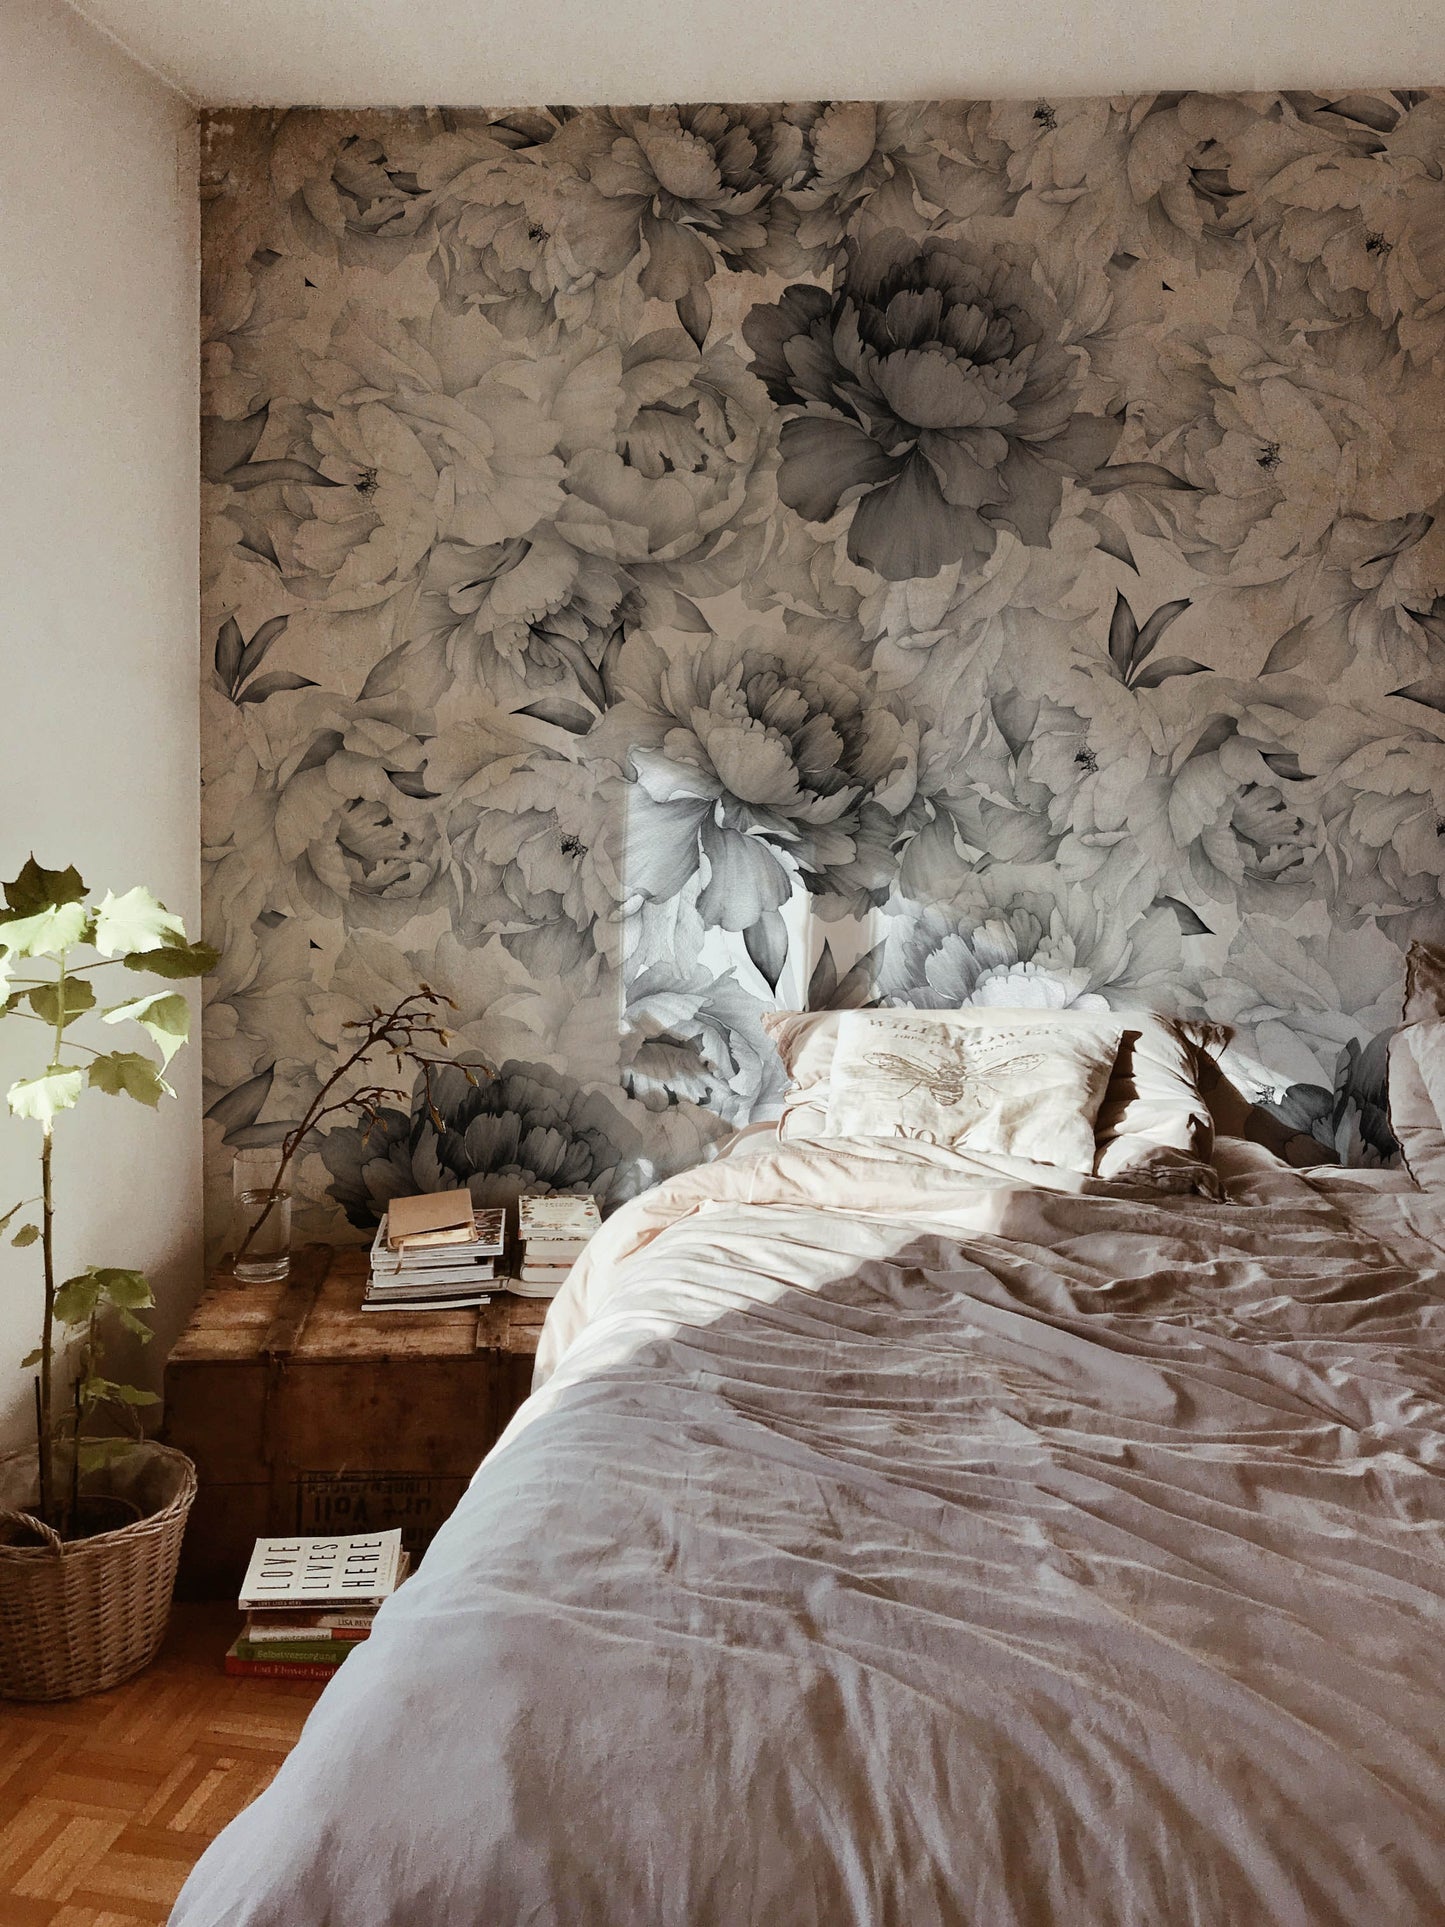 Wall Murals for Bedrooms in Black and White with Simple Flowers